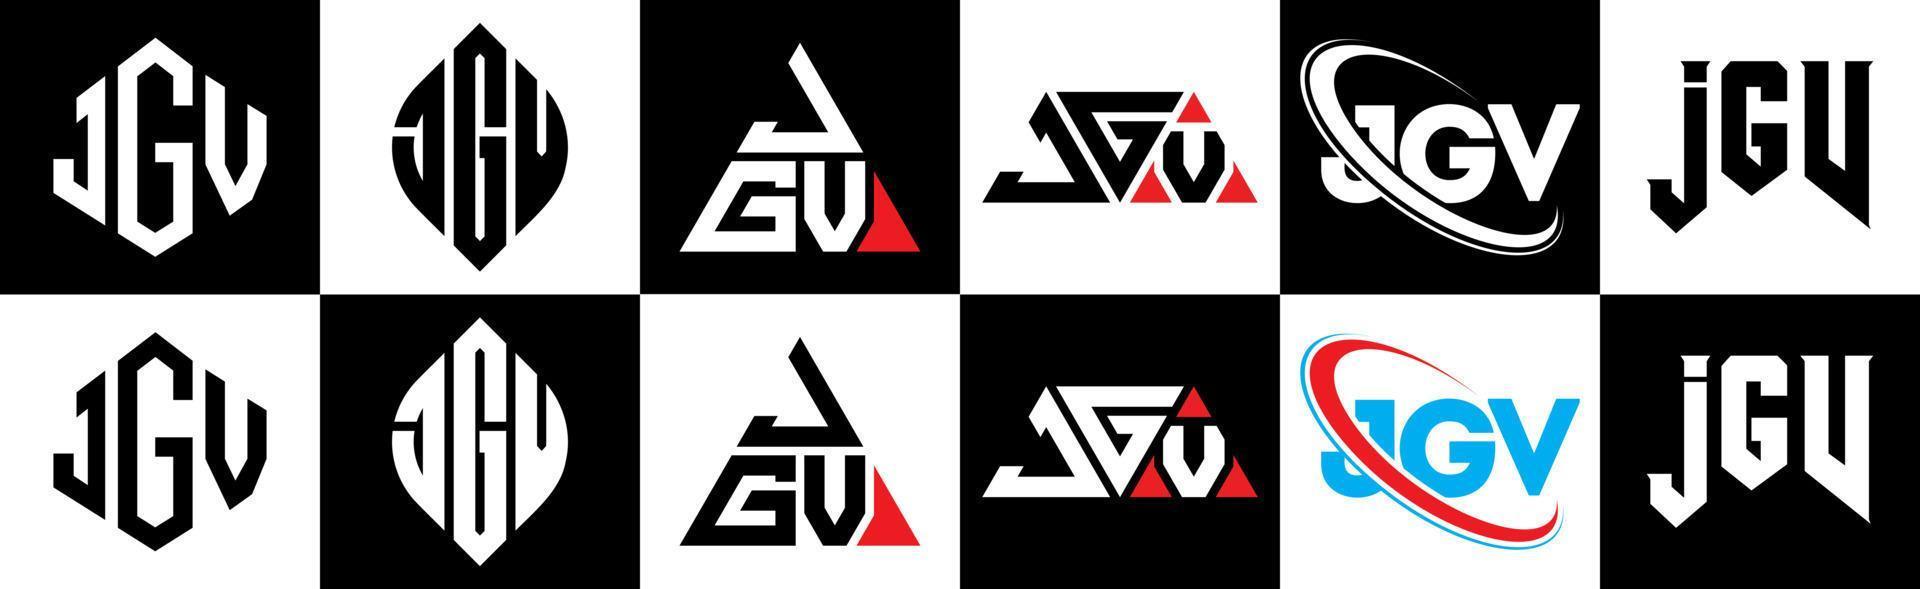 JGV letter logo design in six style. JGV polygon, circle, triangle, hexagon, flat and simple style with black and white color variation letter logo set in one artboard. JGV minimalist and classic logo vector